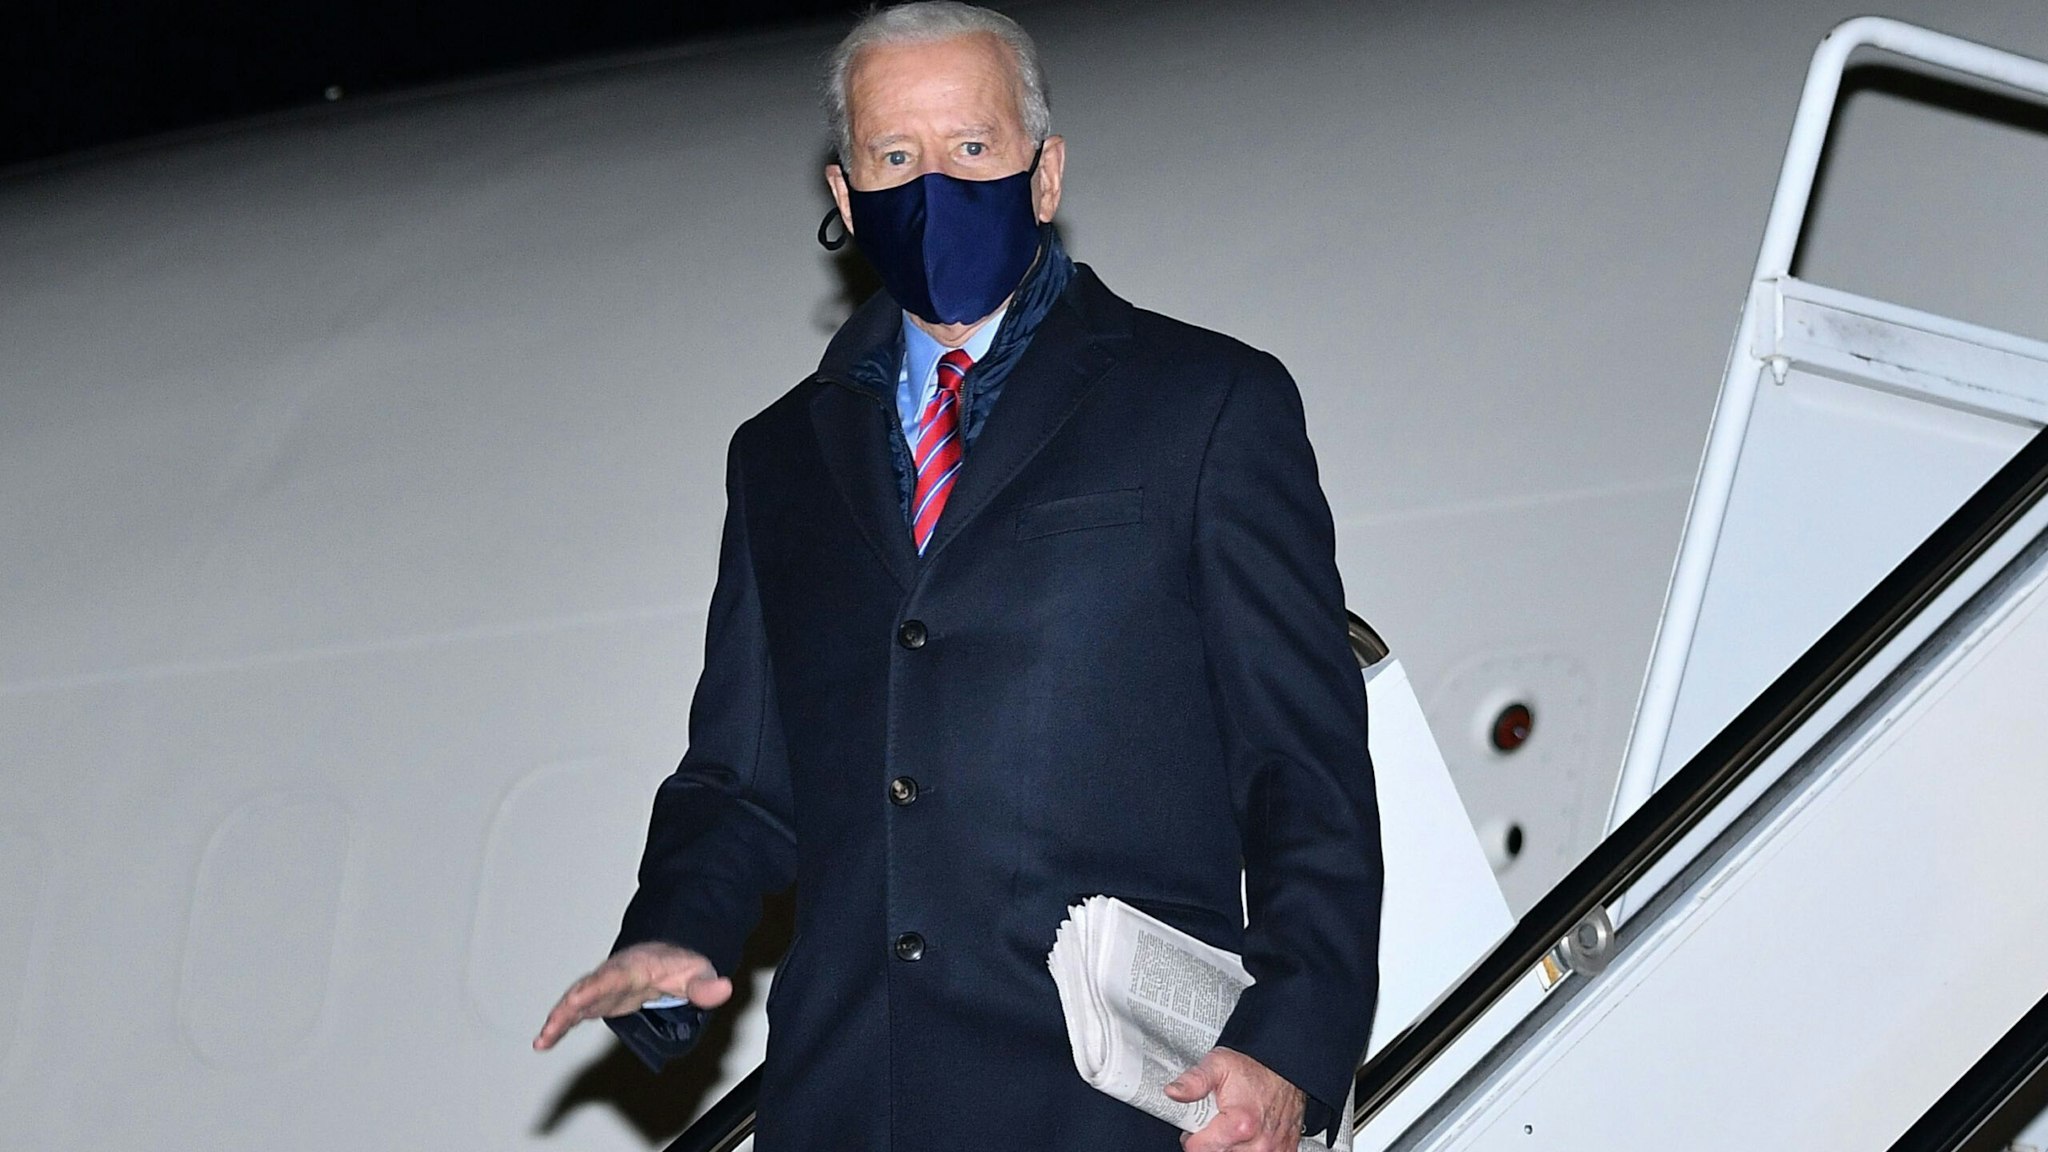 US President Joe Biden steps off Air Force One upon arrival at New Castle Airport in New Castle, Delaware on February 5, 2021. - Biden is due to spend the weekend in Wilmington, Delaware.